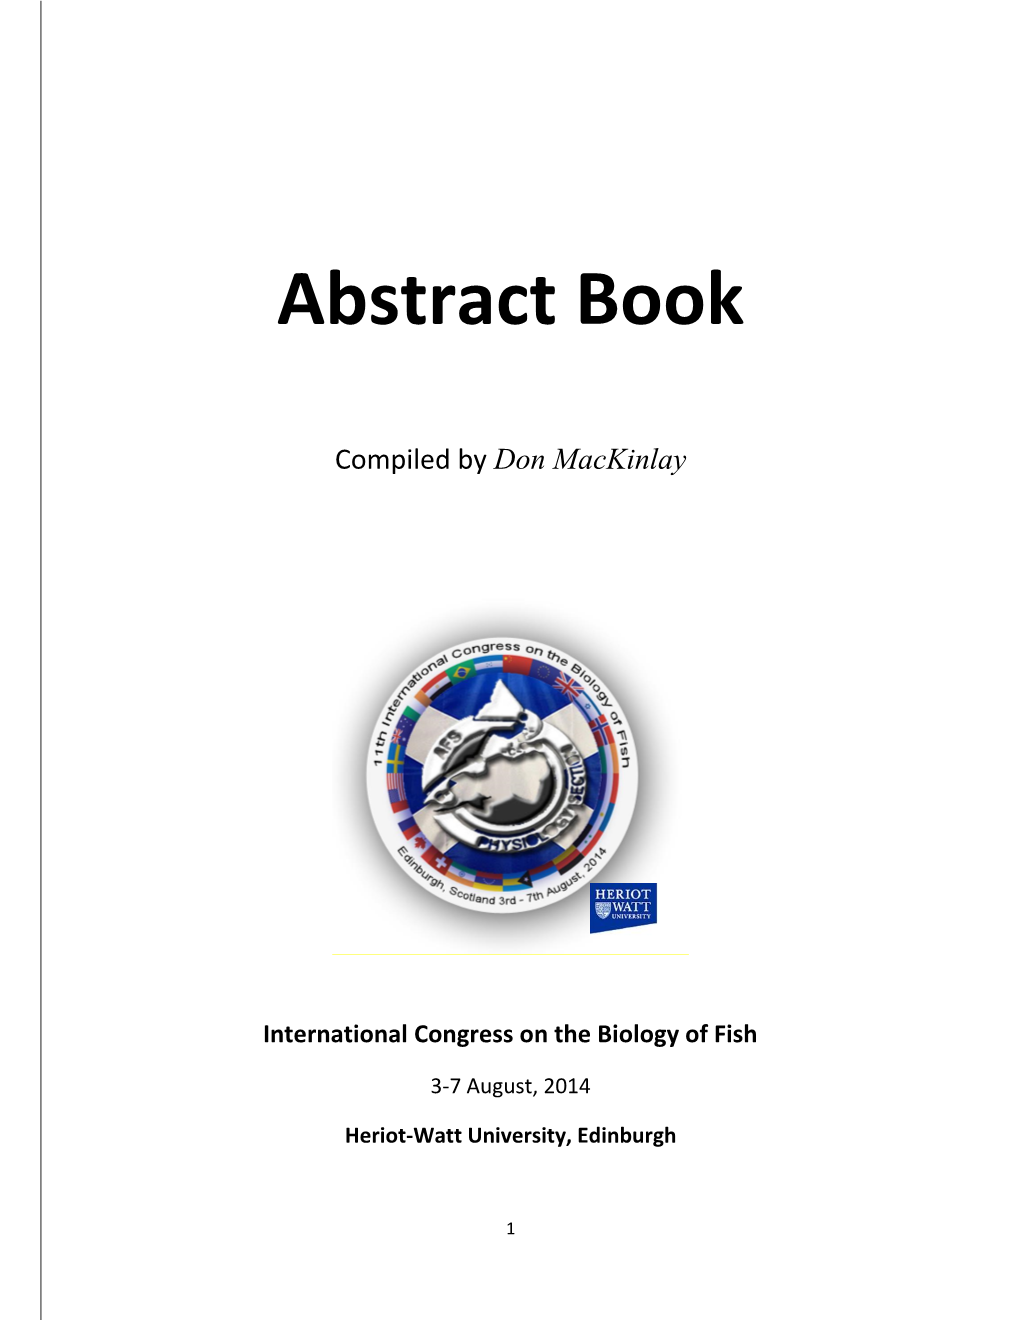 Abstract Book and Detailed Programme